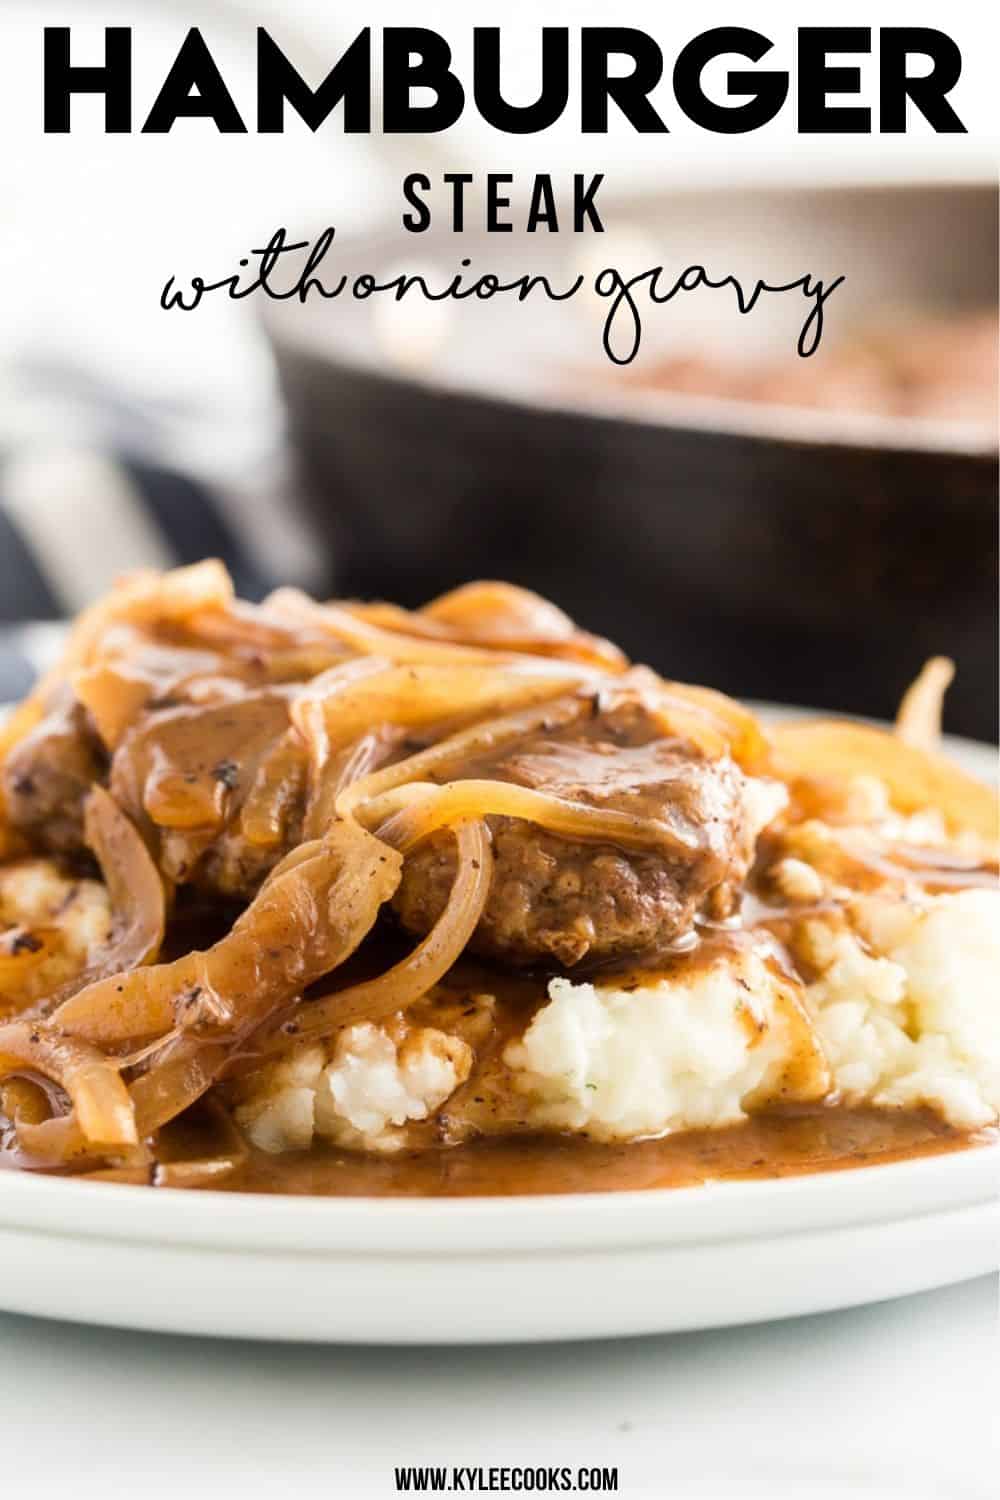 hamburger steaks with onion gravy shed potatoes - with recipe title in text overlaid